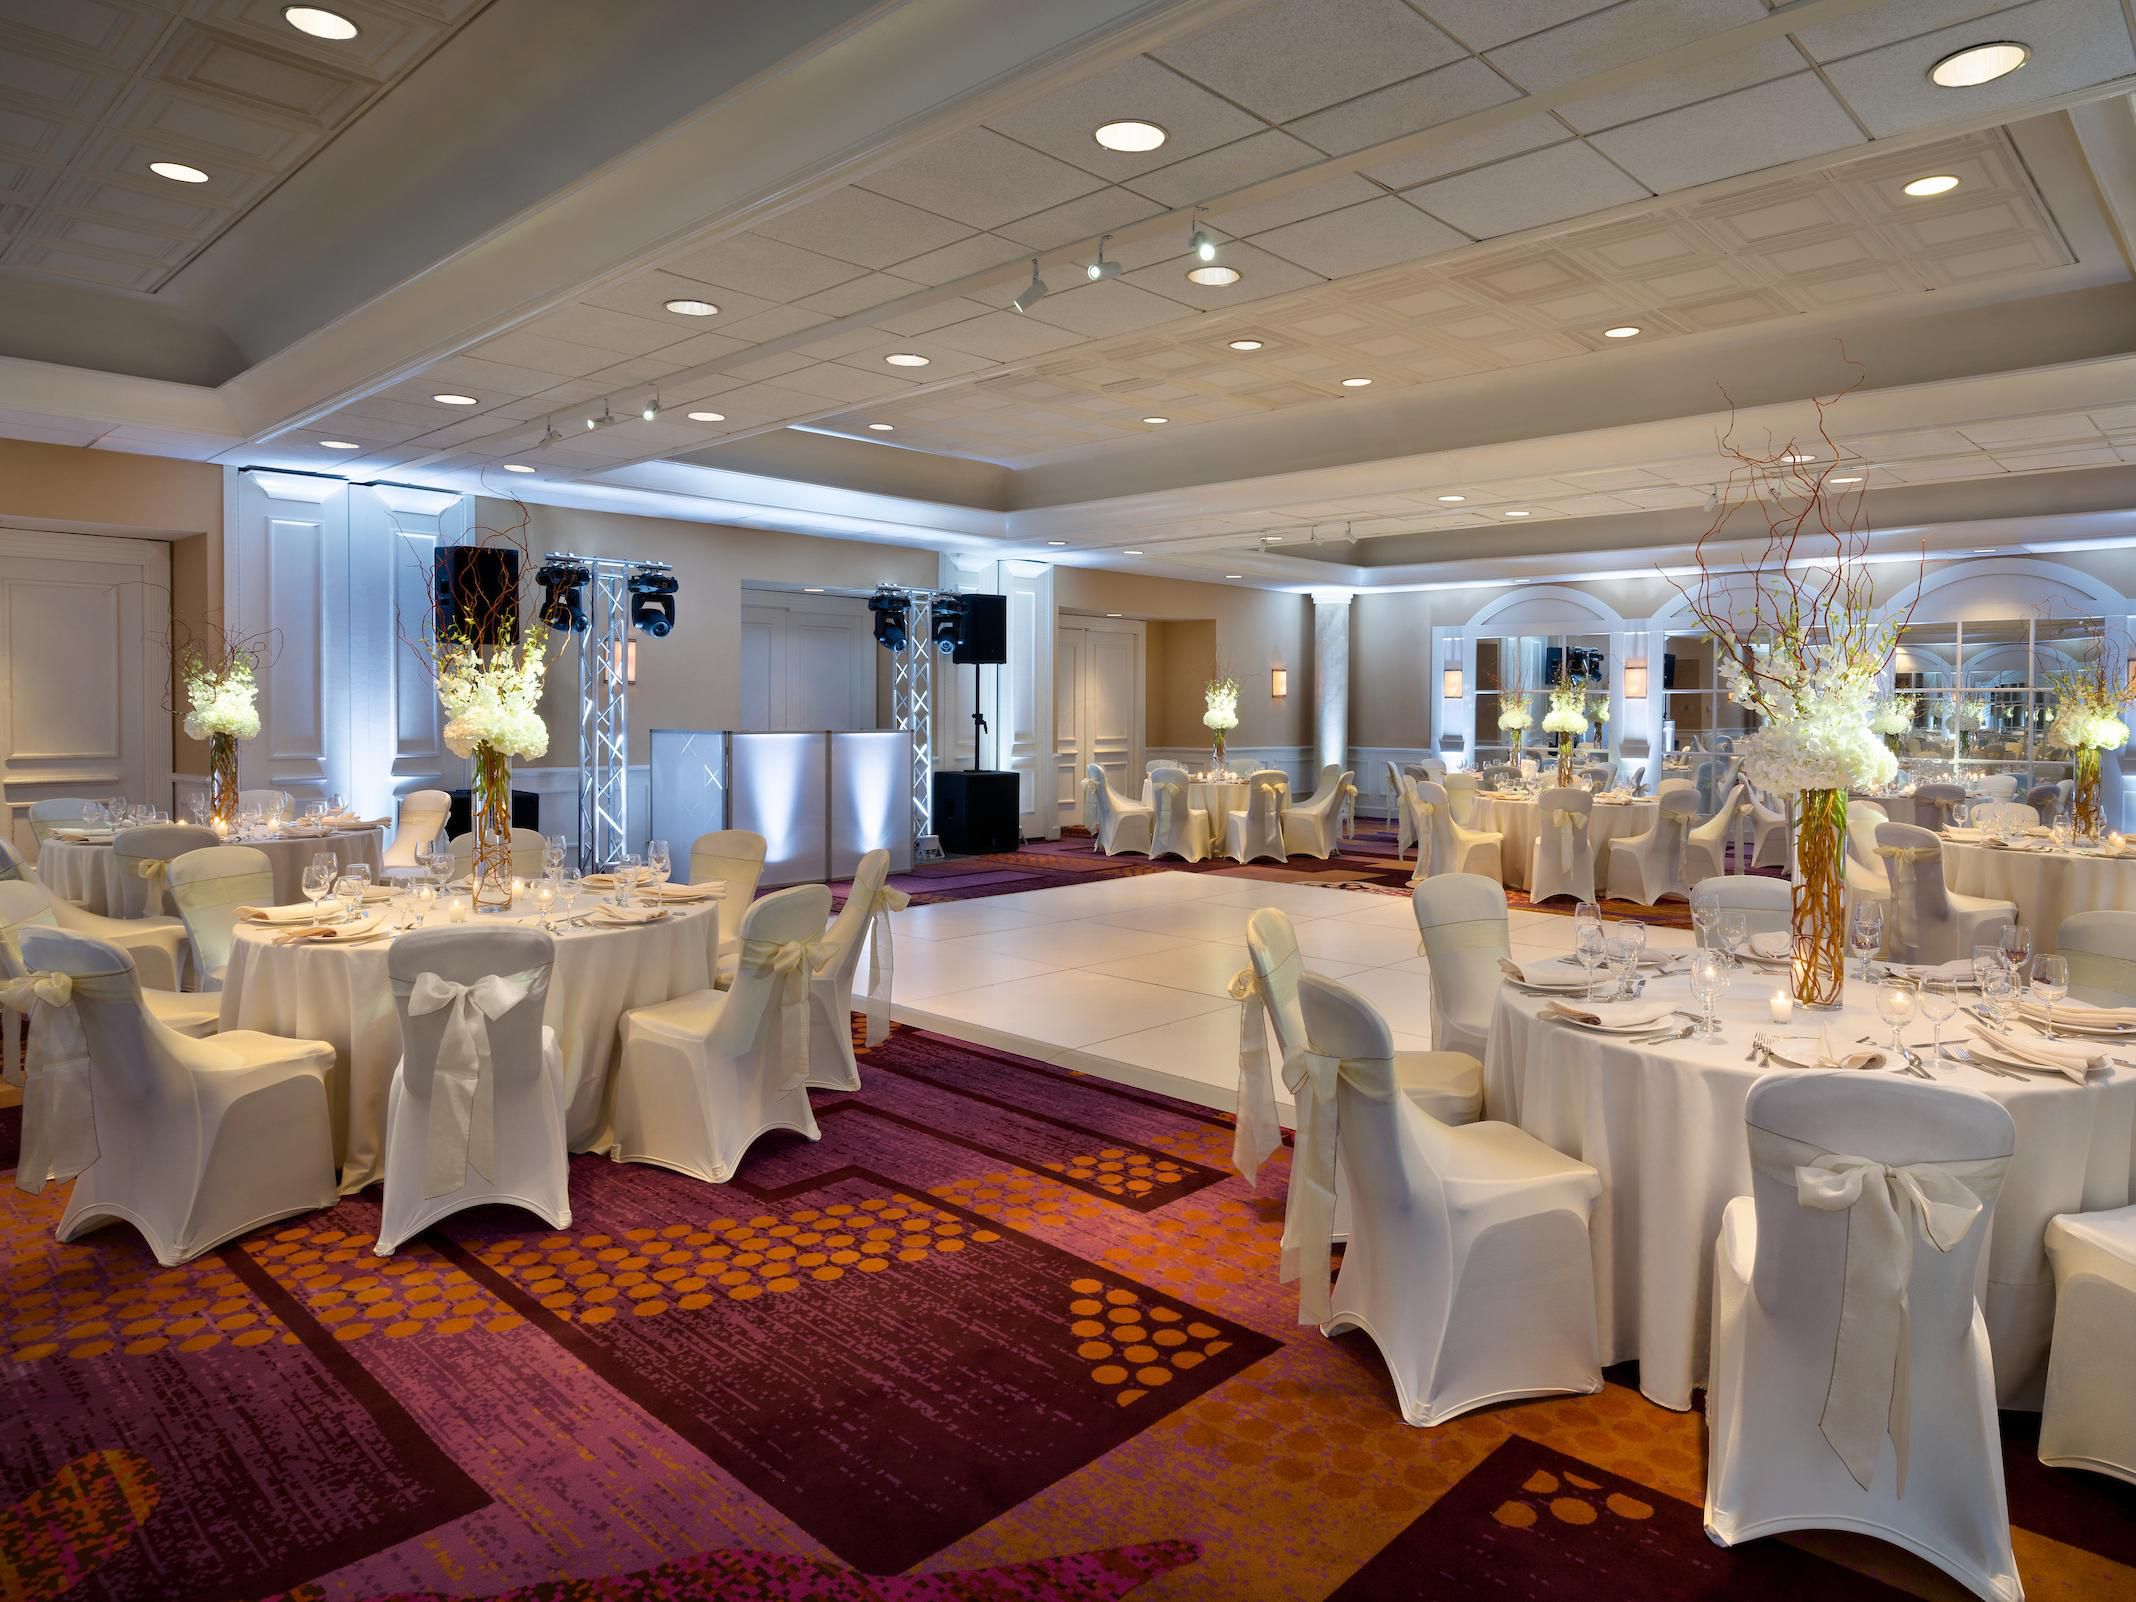 From a business seminar to a holiday party, host your next event in our hotel's fantastic meeting space. With nearly 6,000 square feet, conference rooms, and a grand ballroom, our flexible spaces are the ideal setting for your special occasion.  Our hotel's Meetings Director will help you plan the perfect event for your guests.
